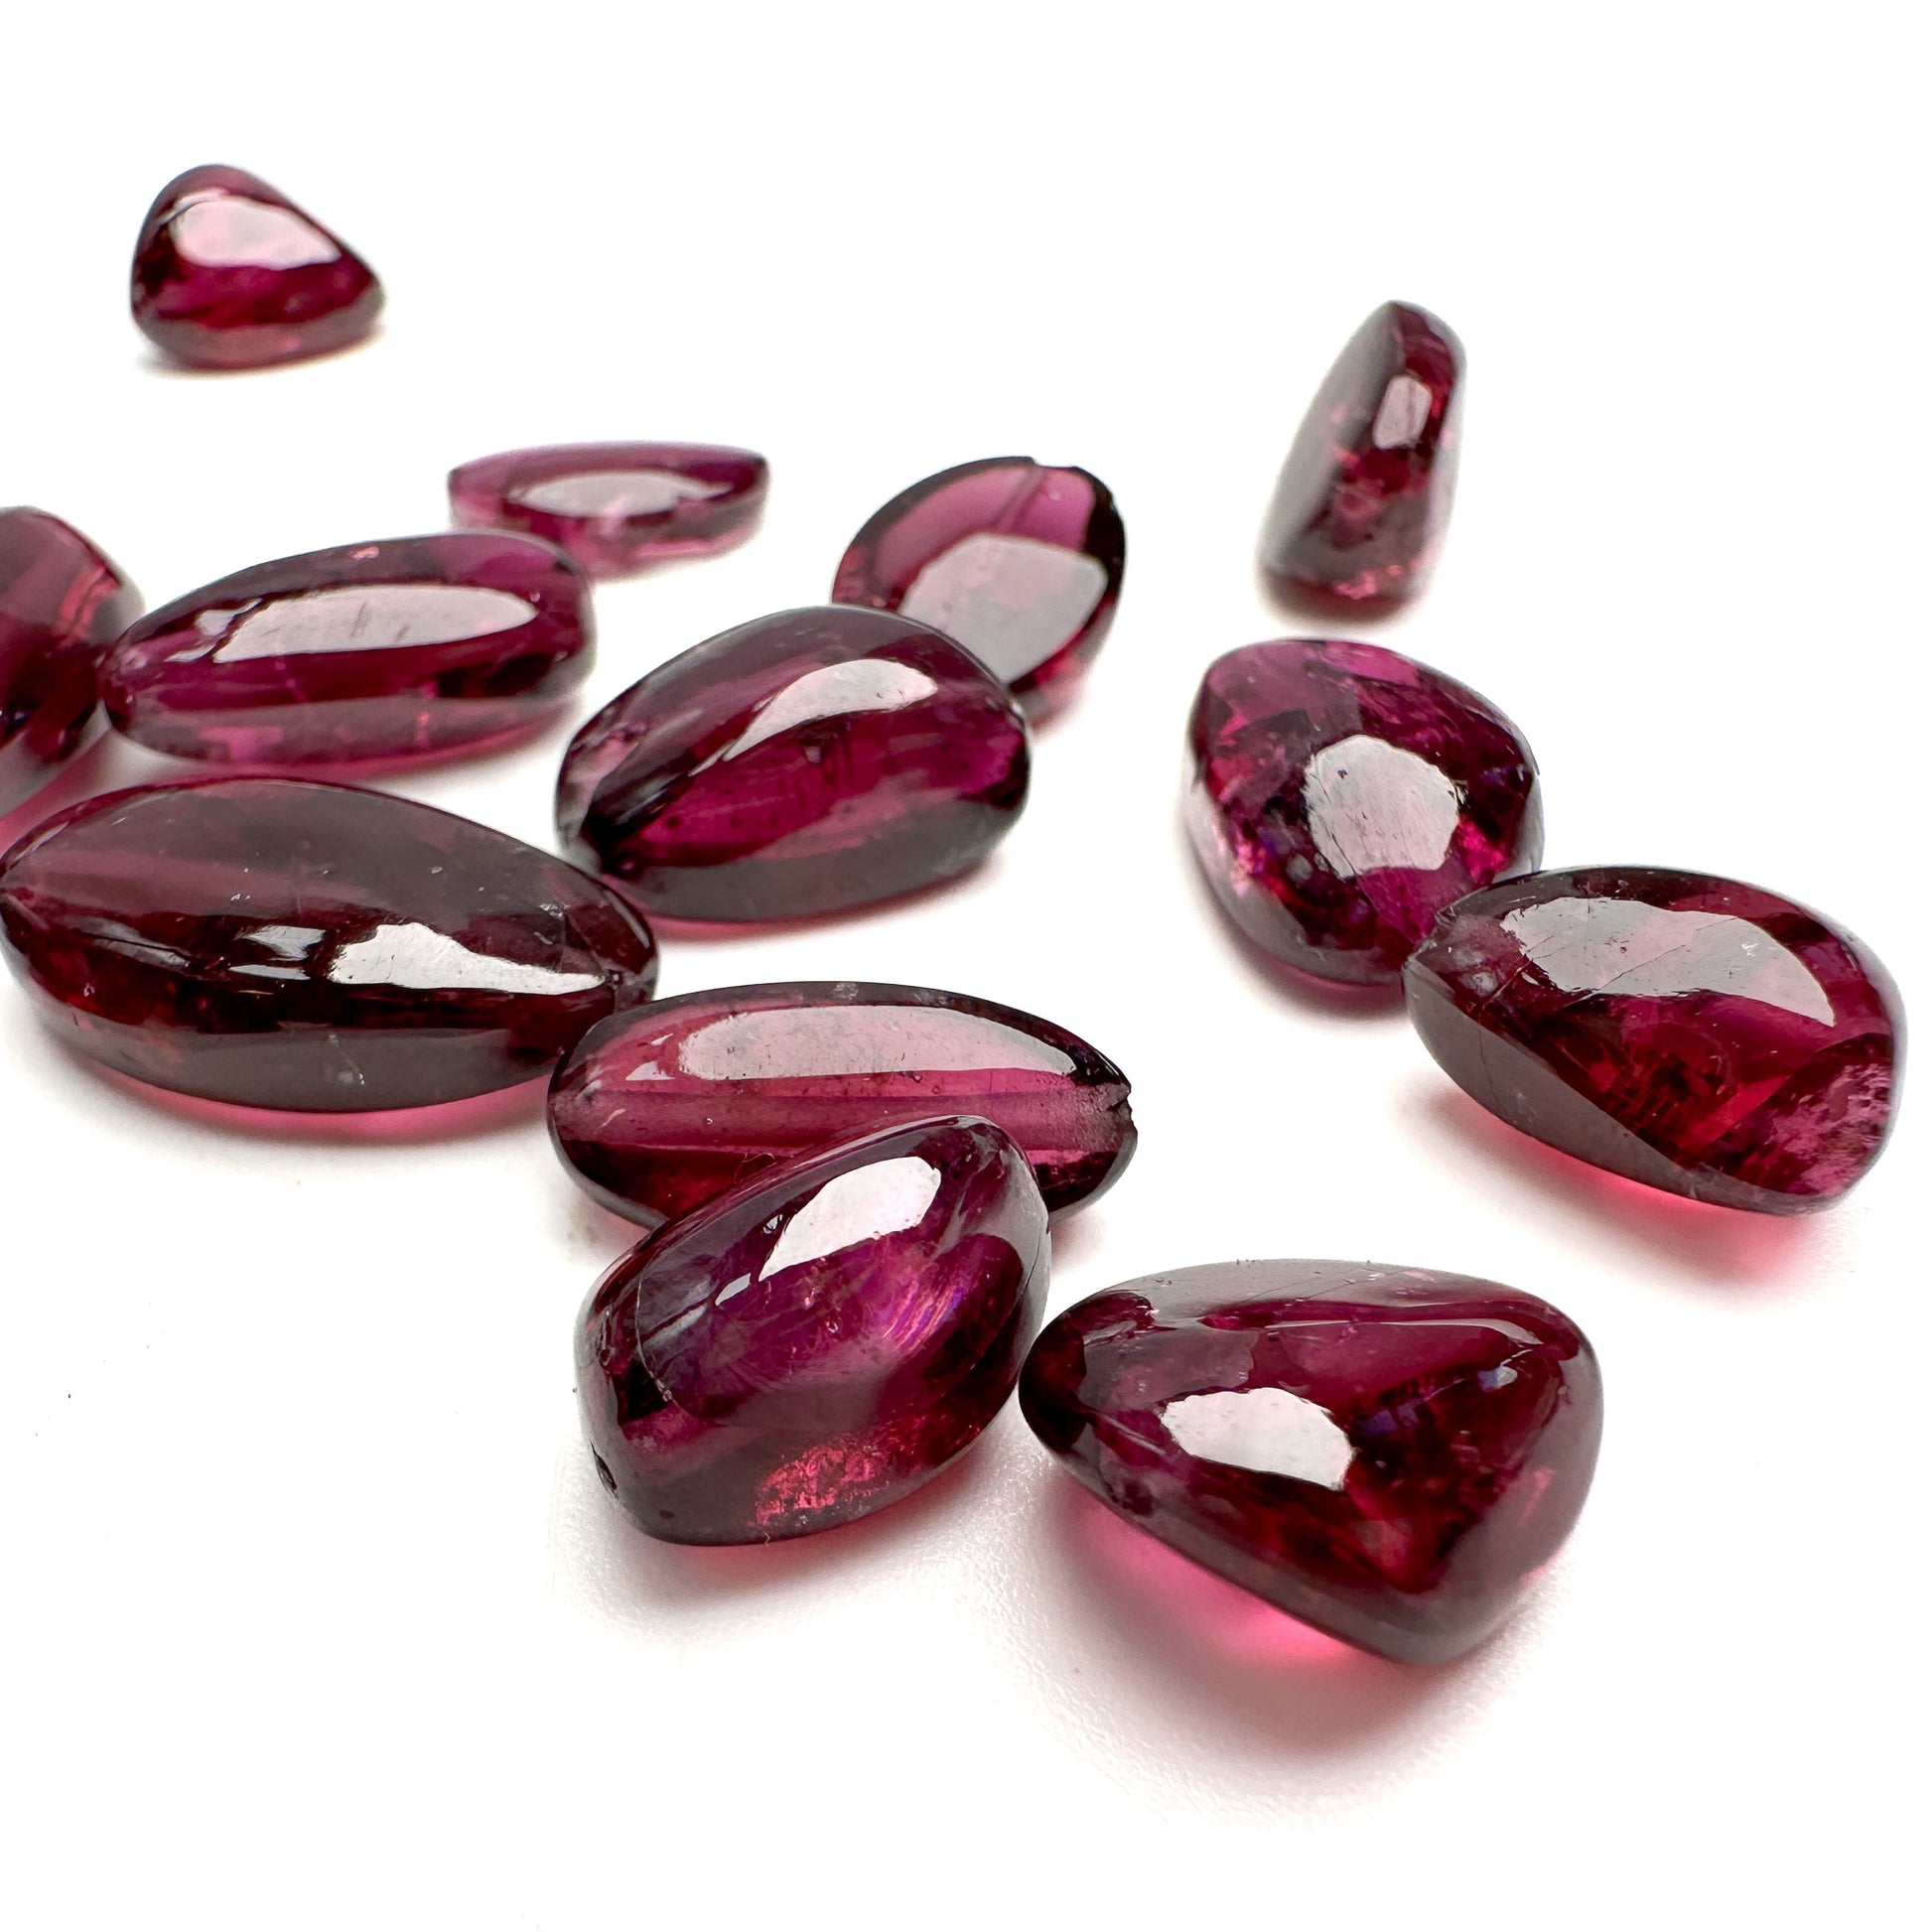 Pink Tourmaline Smooth Long Drill Tumbled Freeform Nugget Bead - 1 pc.-The Bead Gallery Honolulu